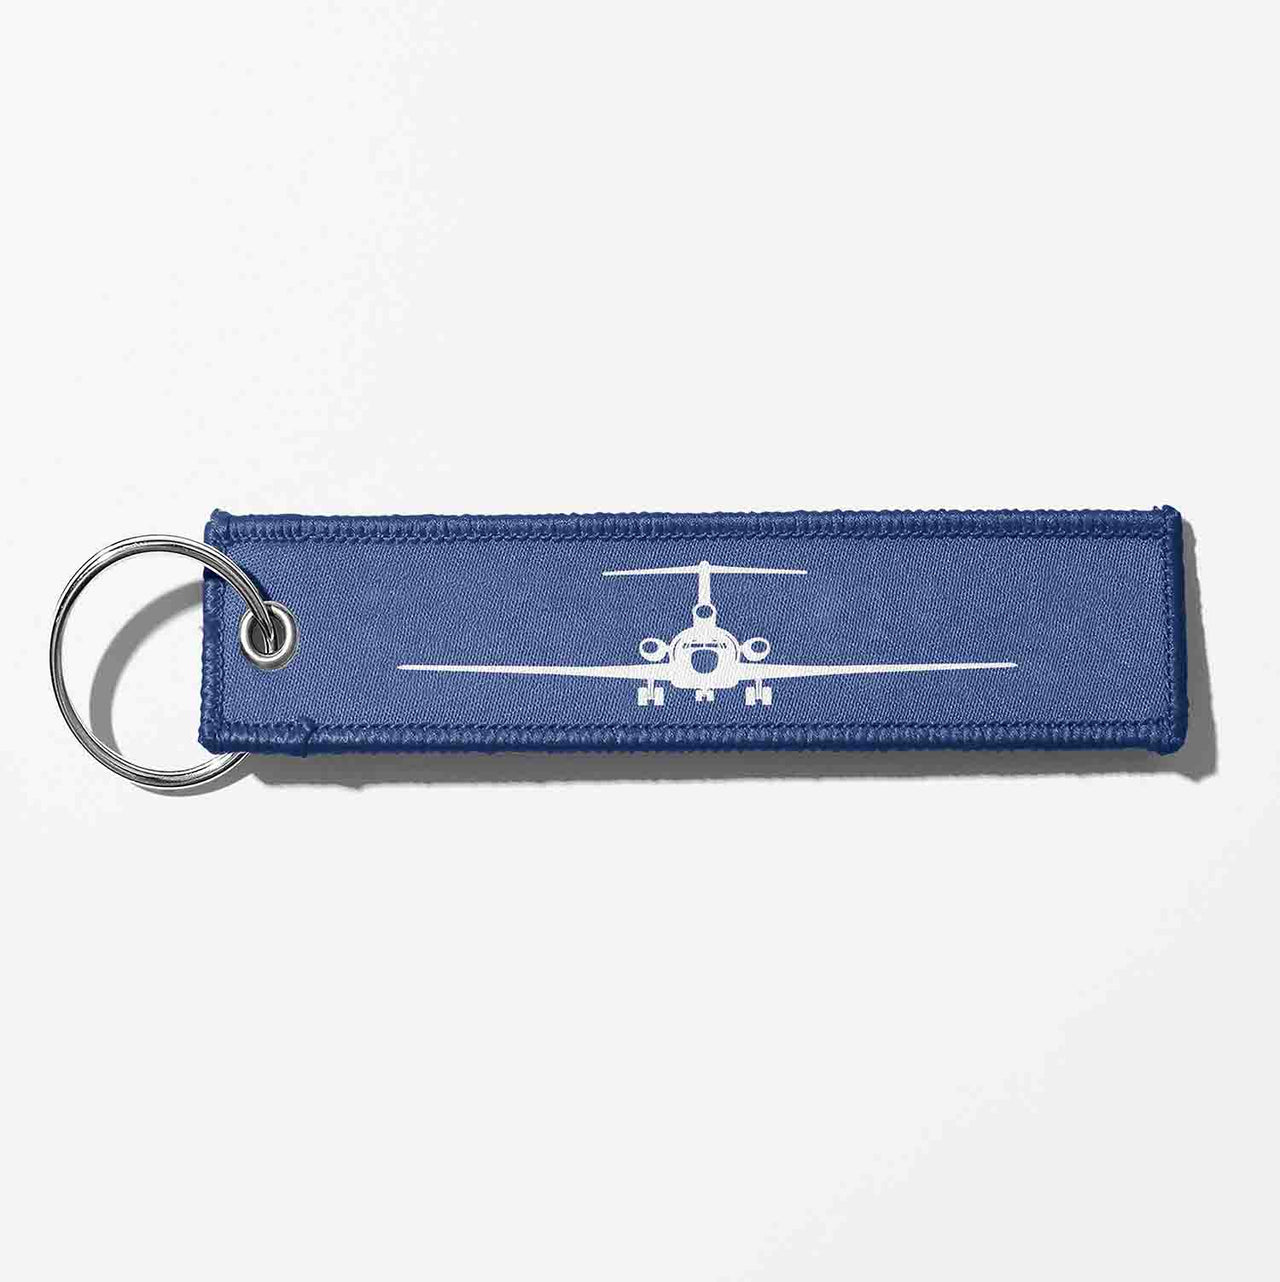 Boeing 727 Silhouette Designed Key Chains